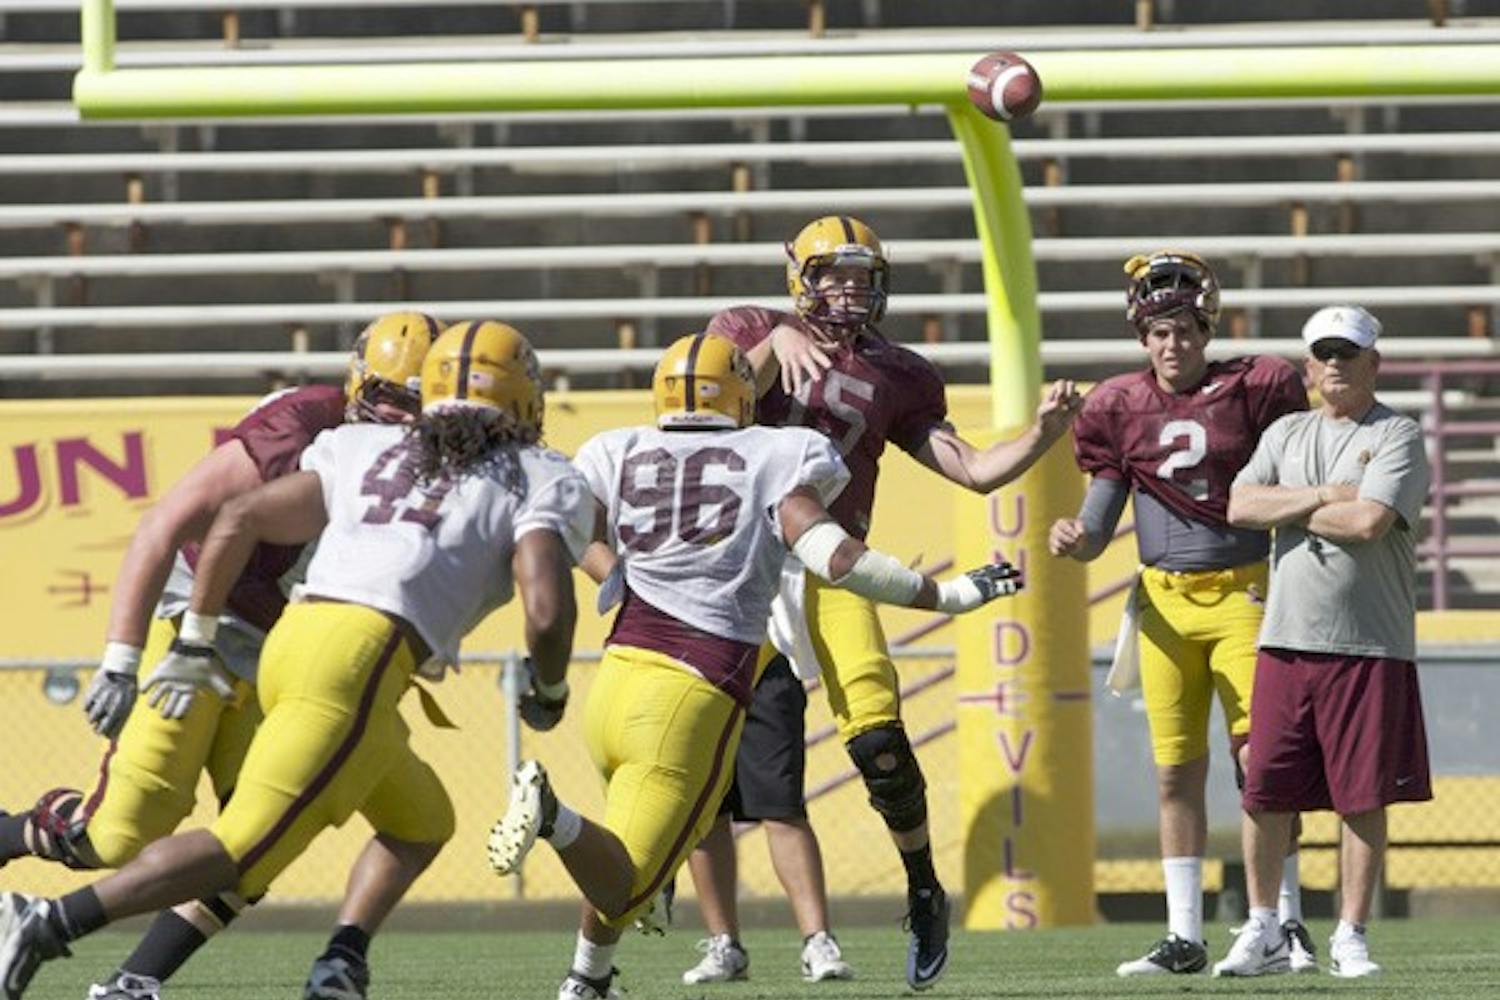 Position Battle: ASU redshirt freshman quarterback Taylor Kelly tosses a short pass during the Sun Devils’ team scrimmage on Saturday in Tempe. Kelly is competing with incoming freshman Mike Bercovici (No. 2 uniform) to back up junior quarterback Brock Osweiler for the 2011 season. (Photo by Scott Stuk)